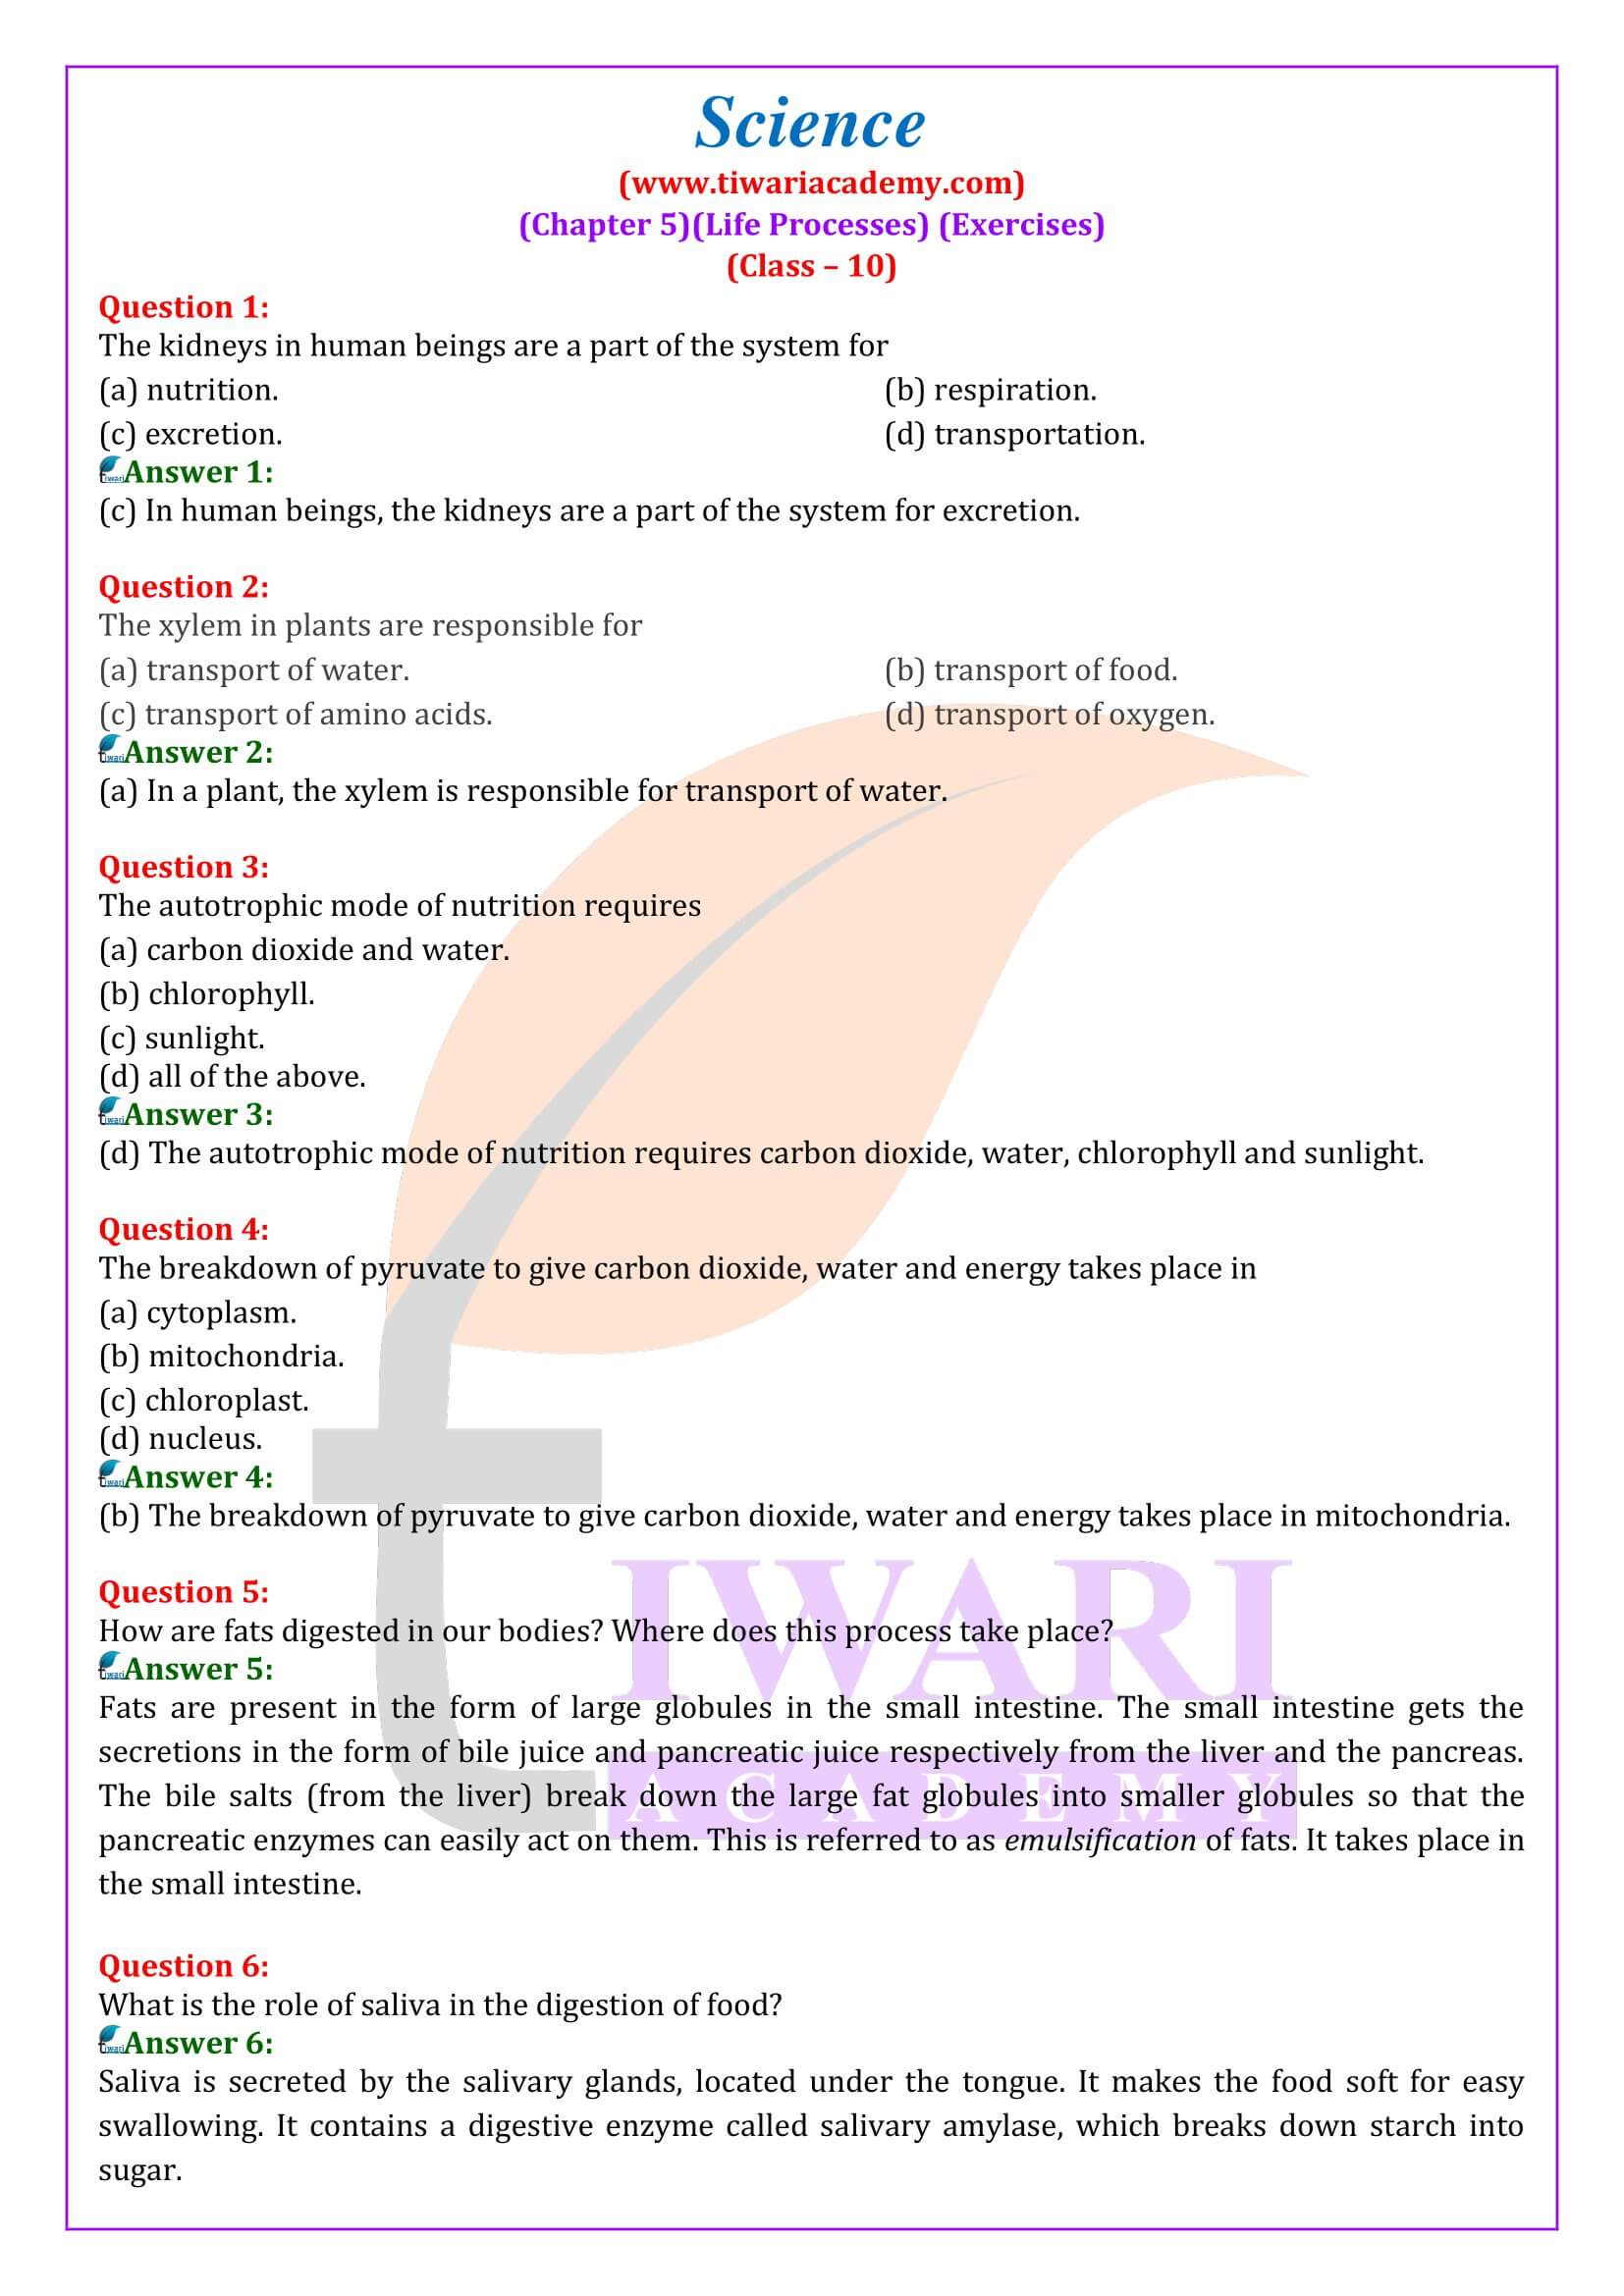 Class 10 Science Chapter 5 Life Processes